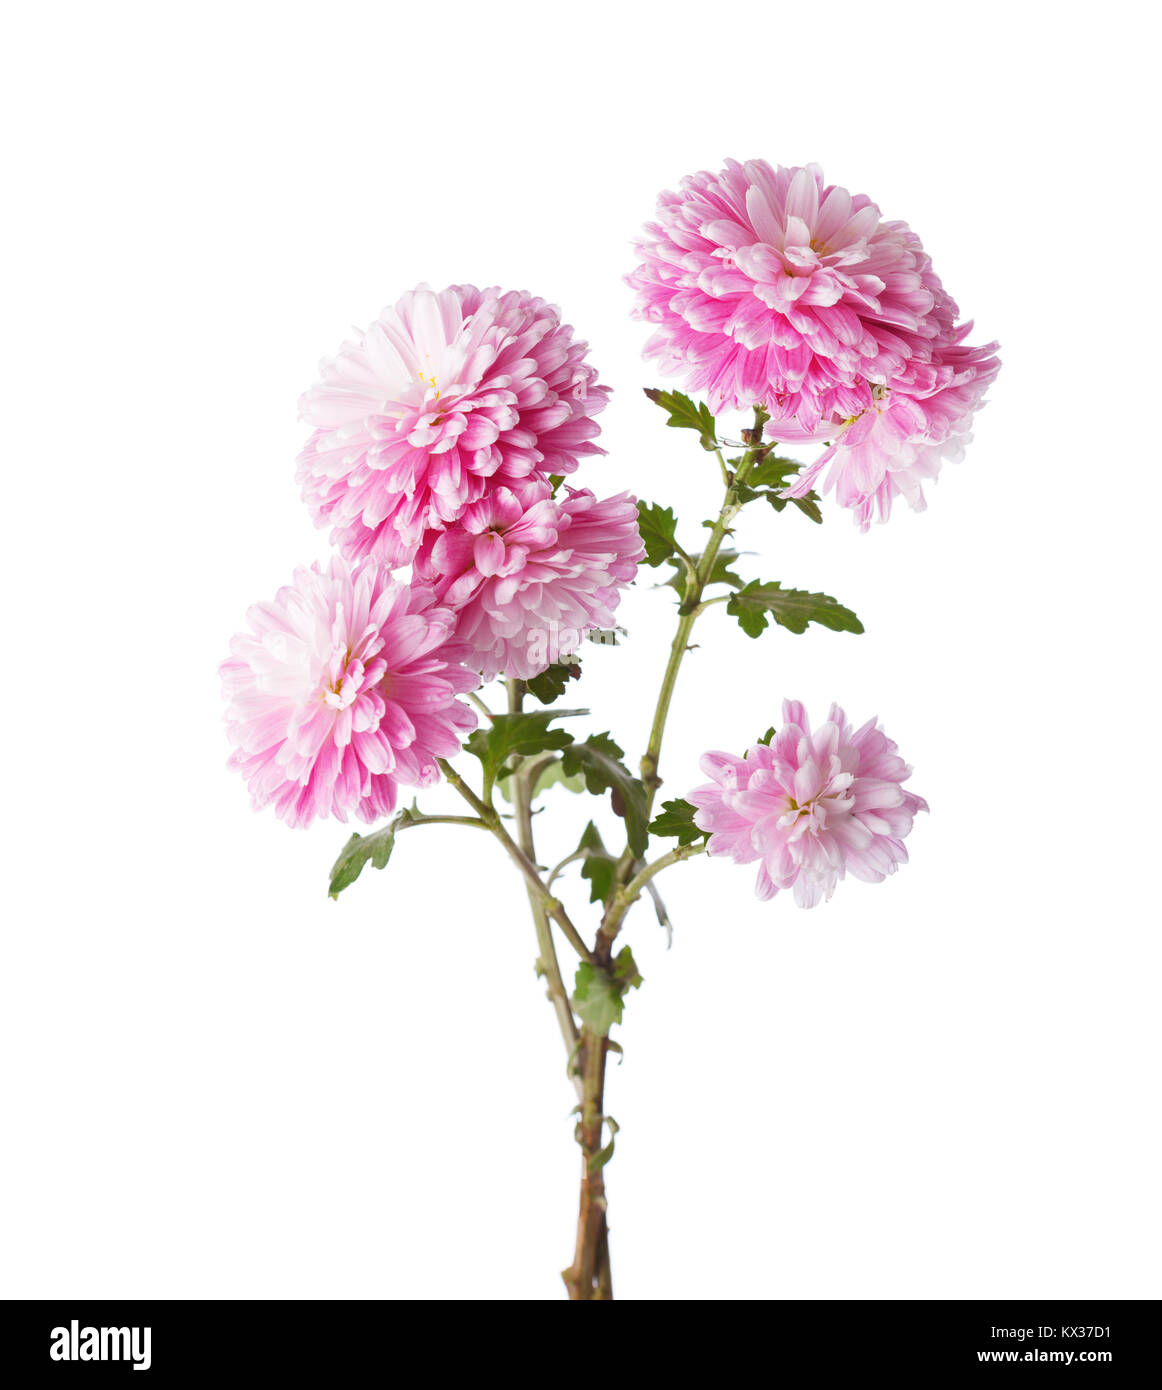 Branches with flowers of chrysanthemums isolated on white background. Stock Photo